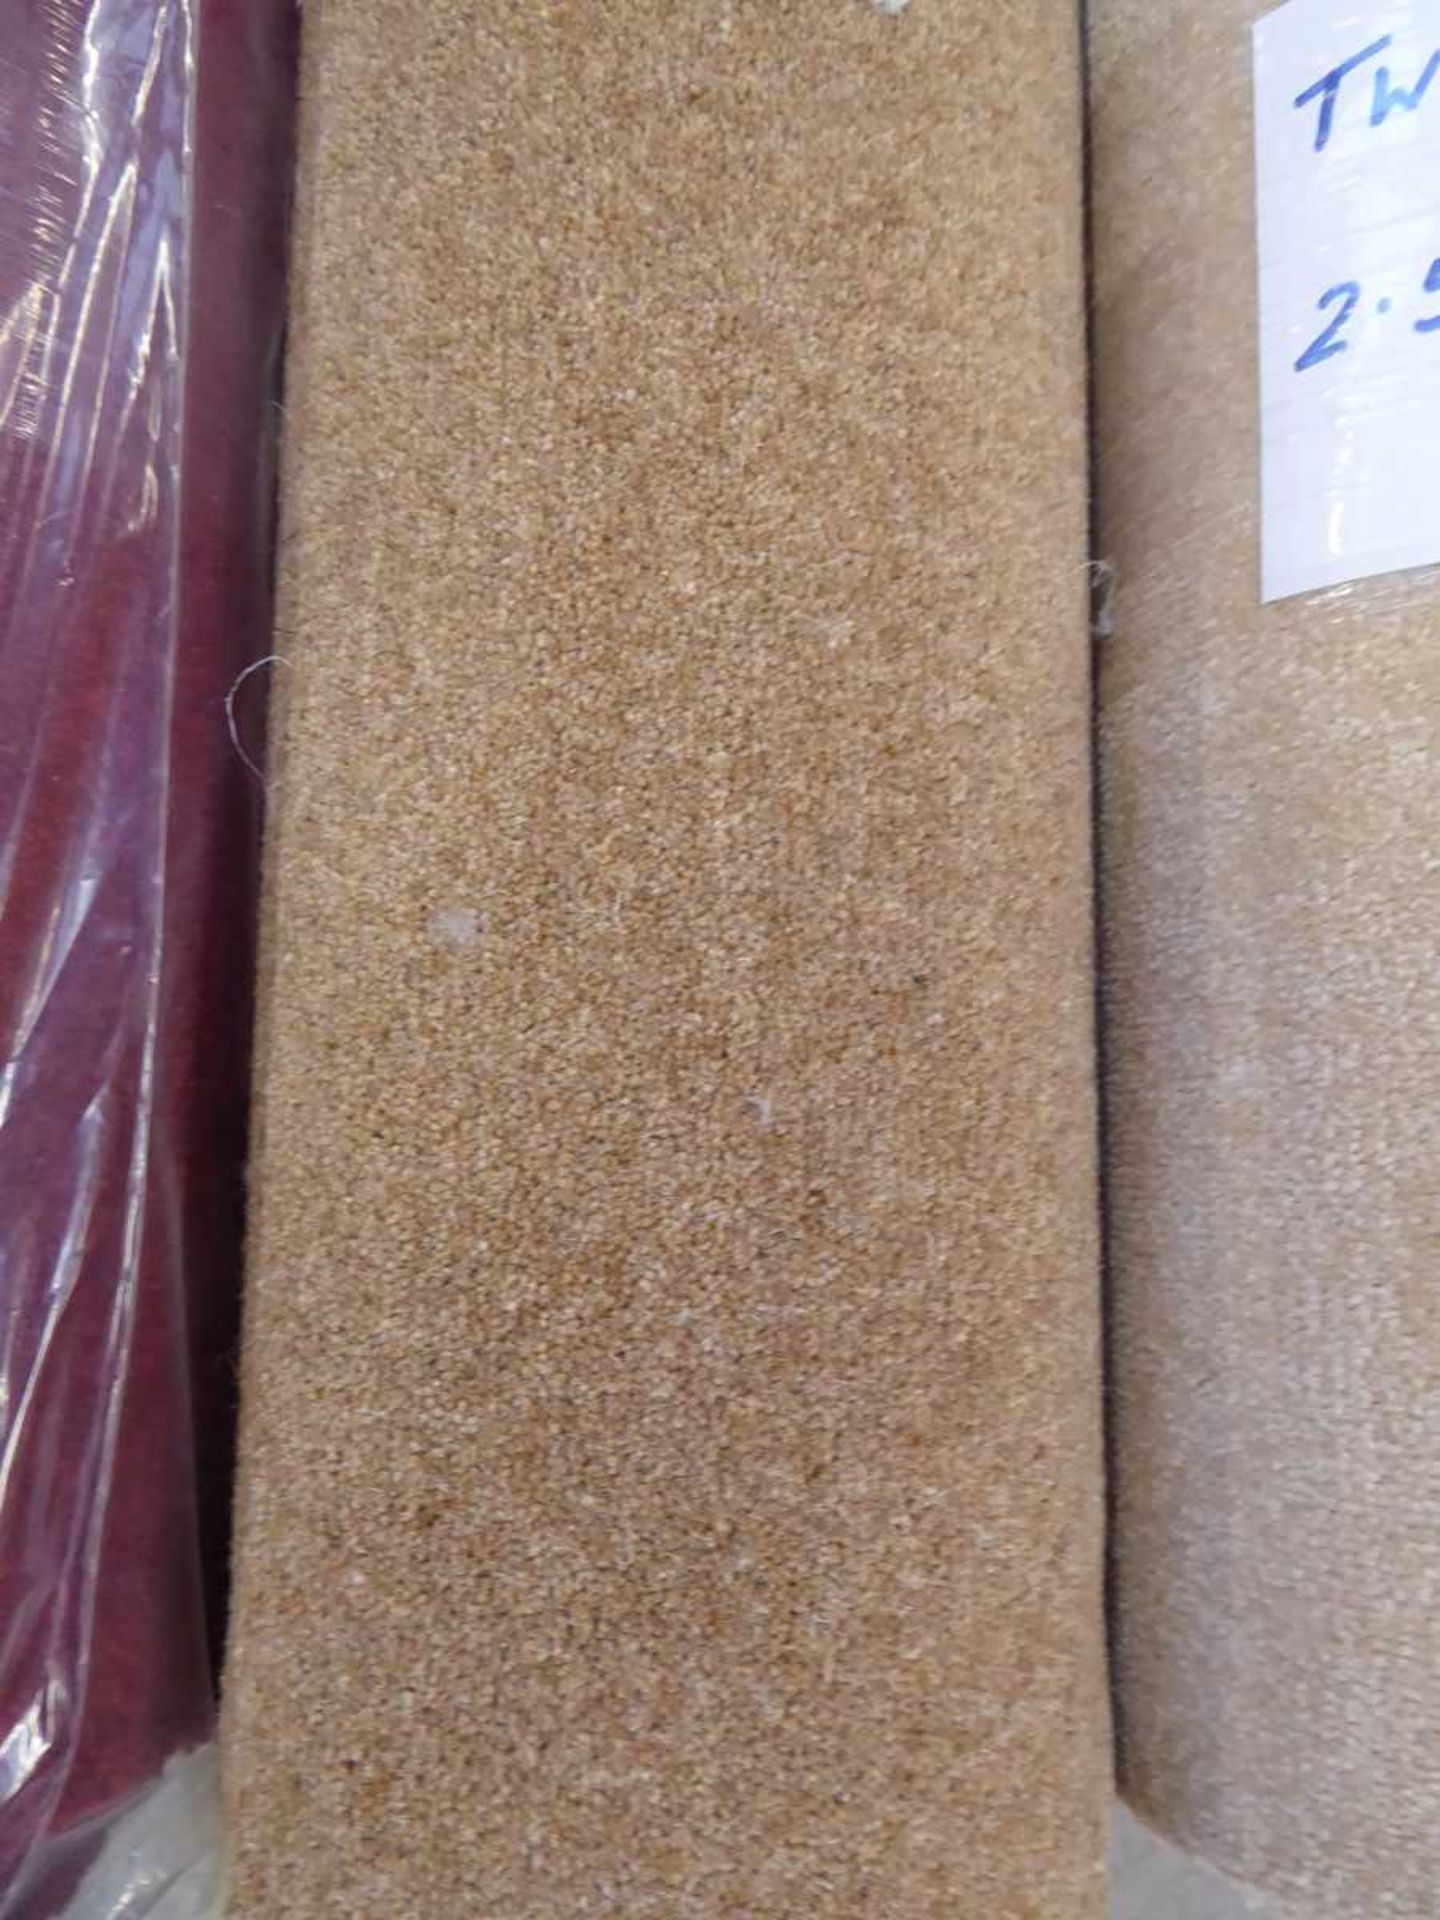 2.85 x 3.05m roll of brown wall twist carpet - Image 2 of 2